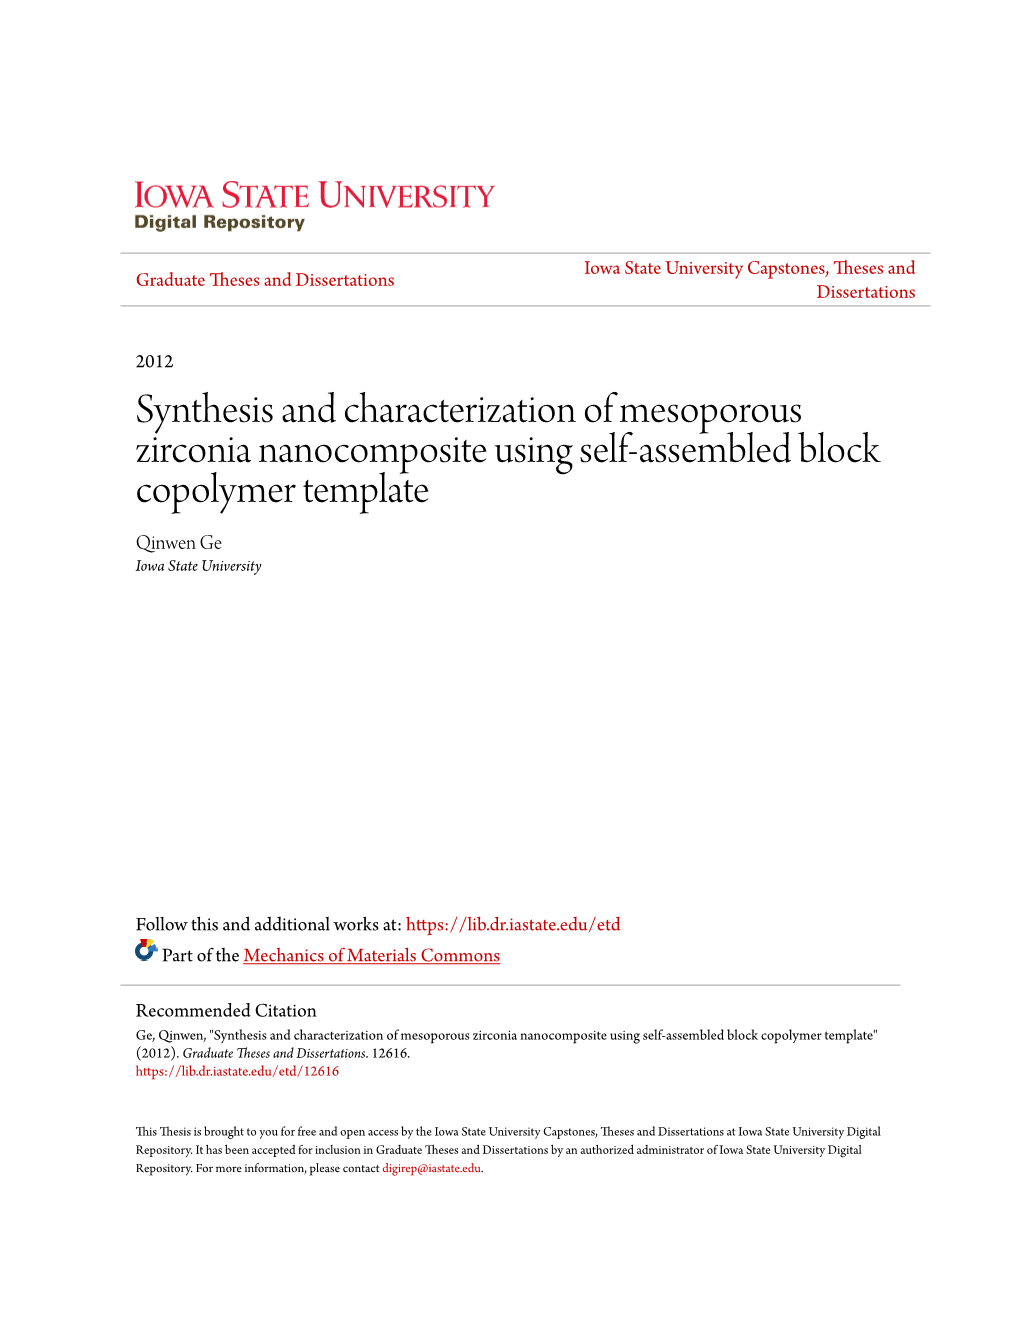 Synthesis and Characterization of Mesoporous Zirconia Nanocomposite Using Self-Assembled Block Copolymer Template Qinwen Ge Iowa State University